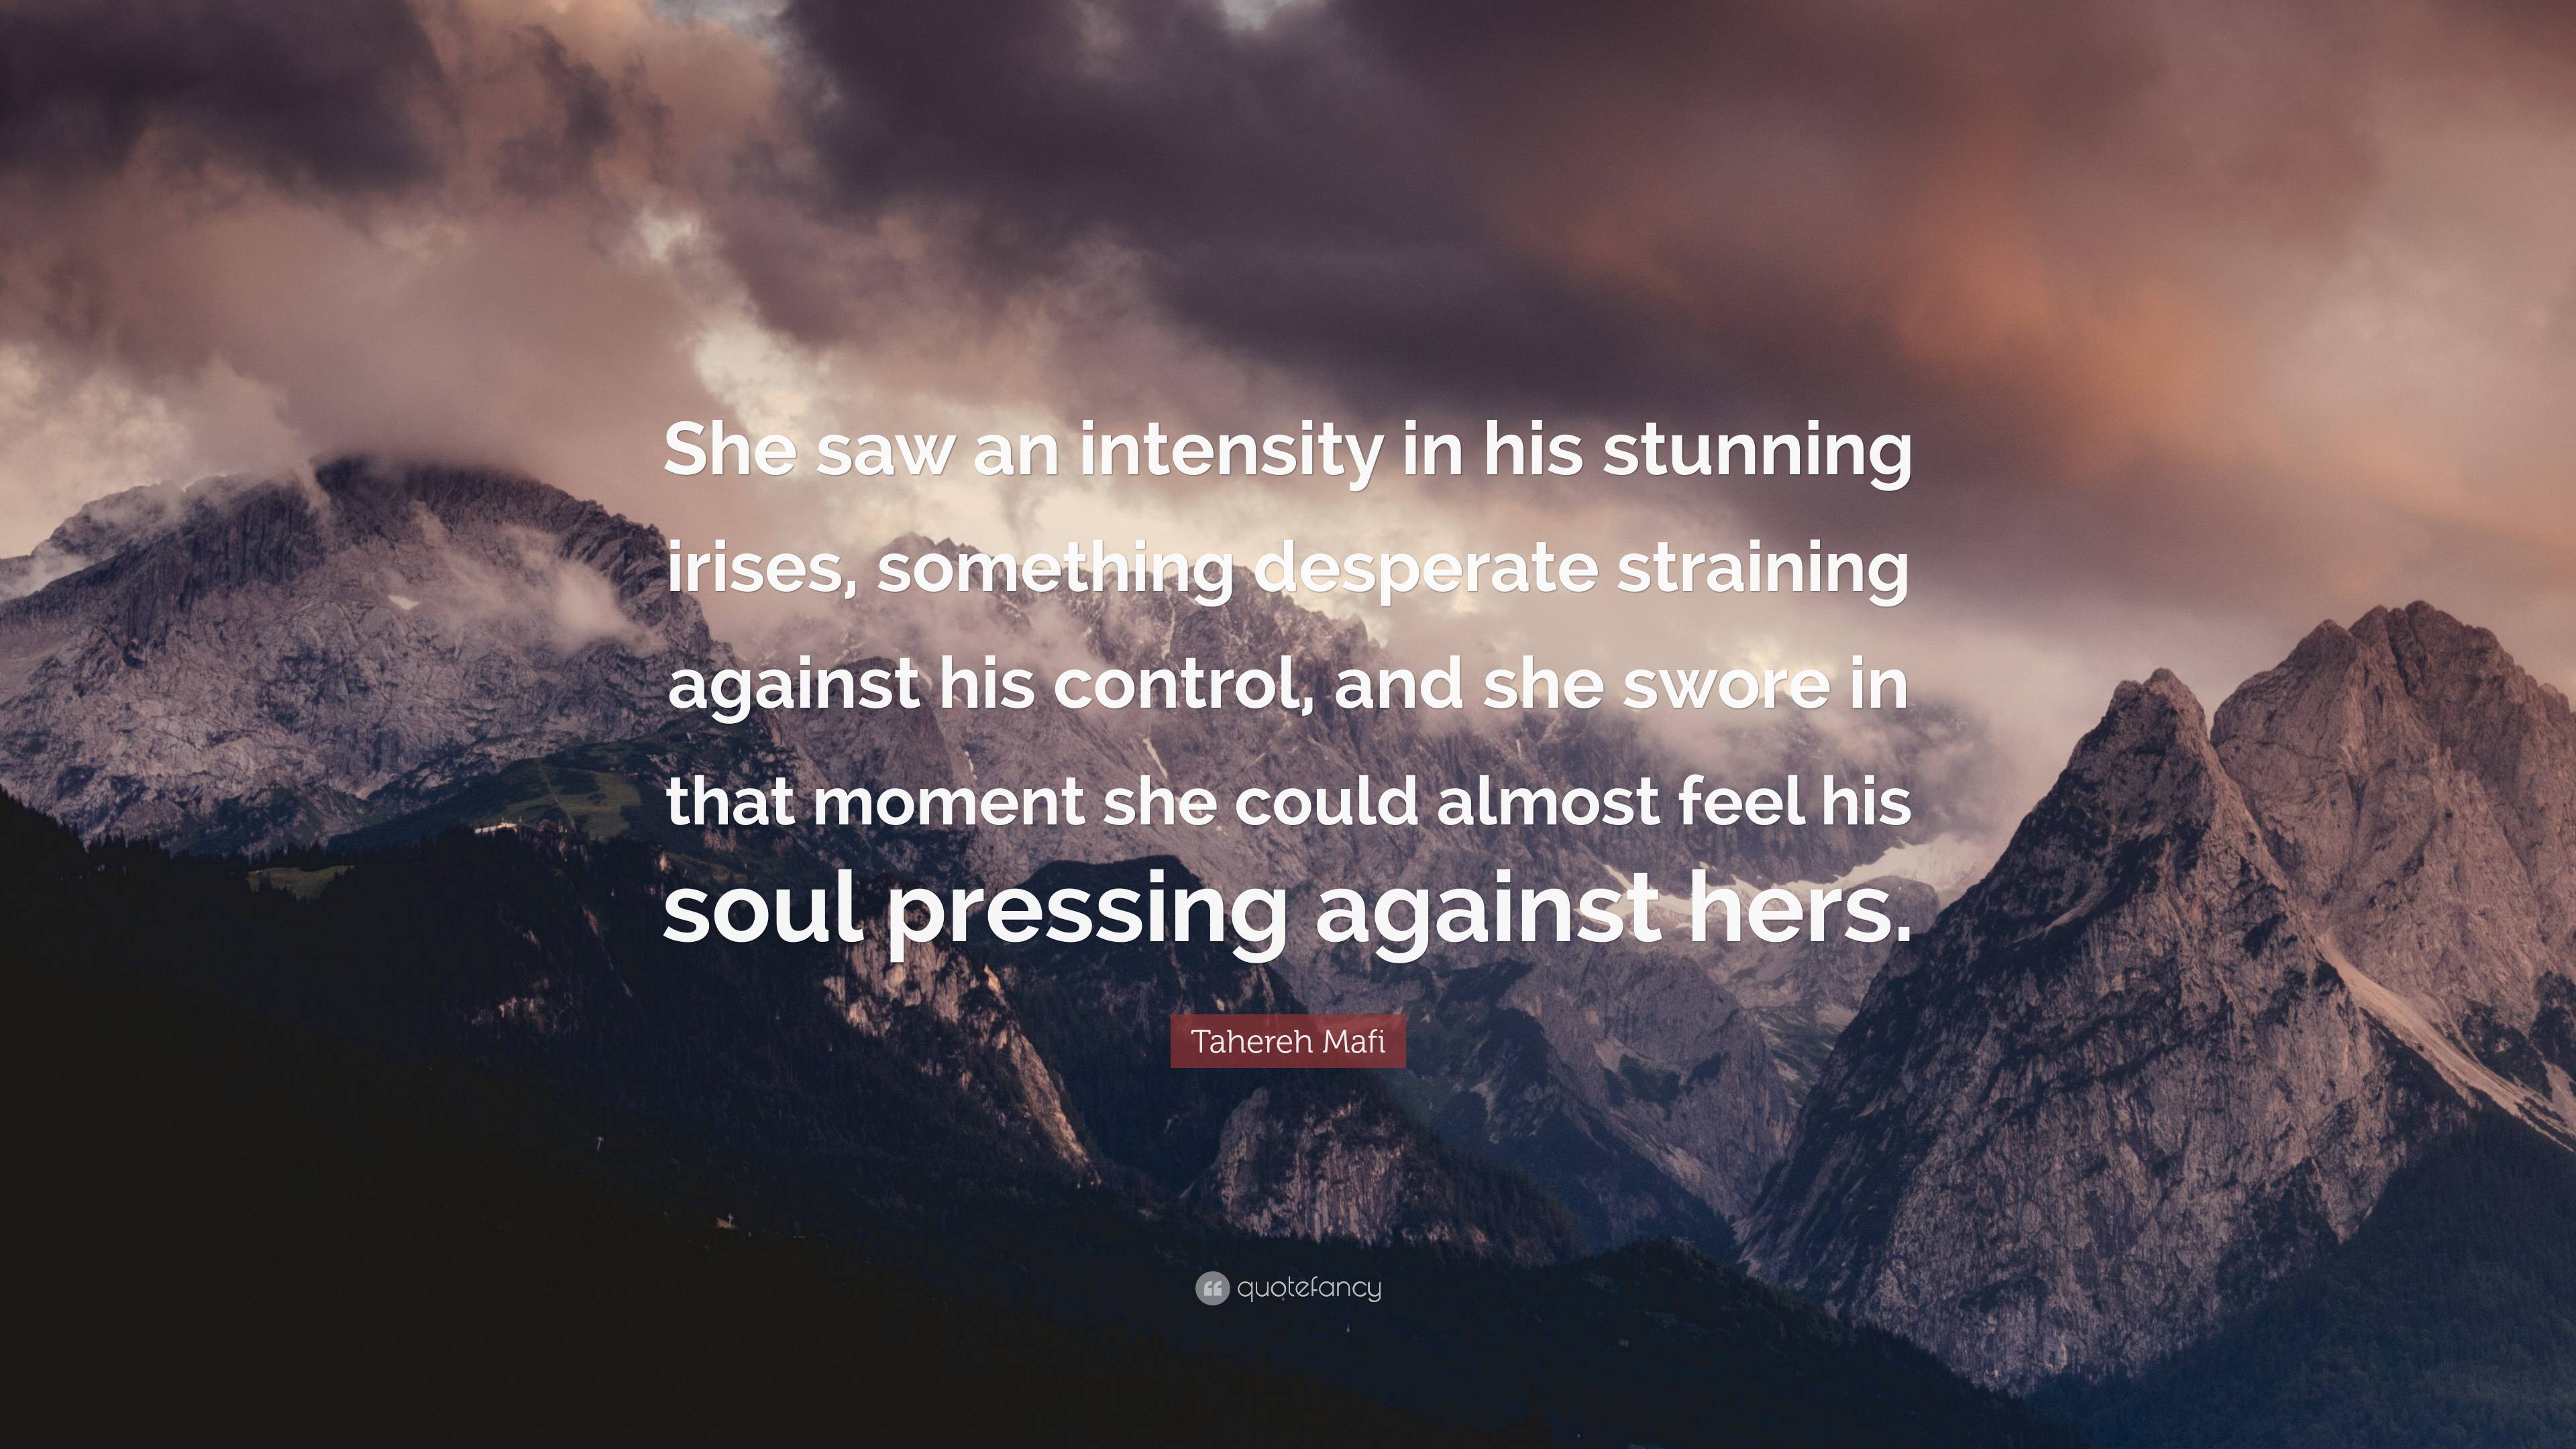 Tahereh Mafi Quote: “She saw an intensity in his stunning irises ...